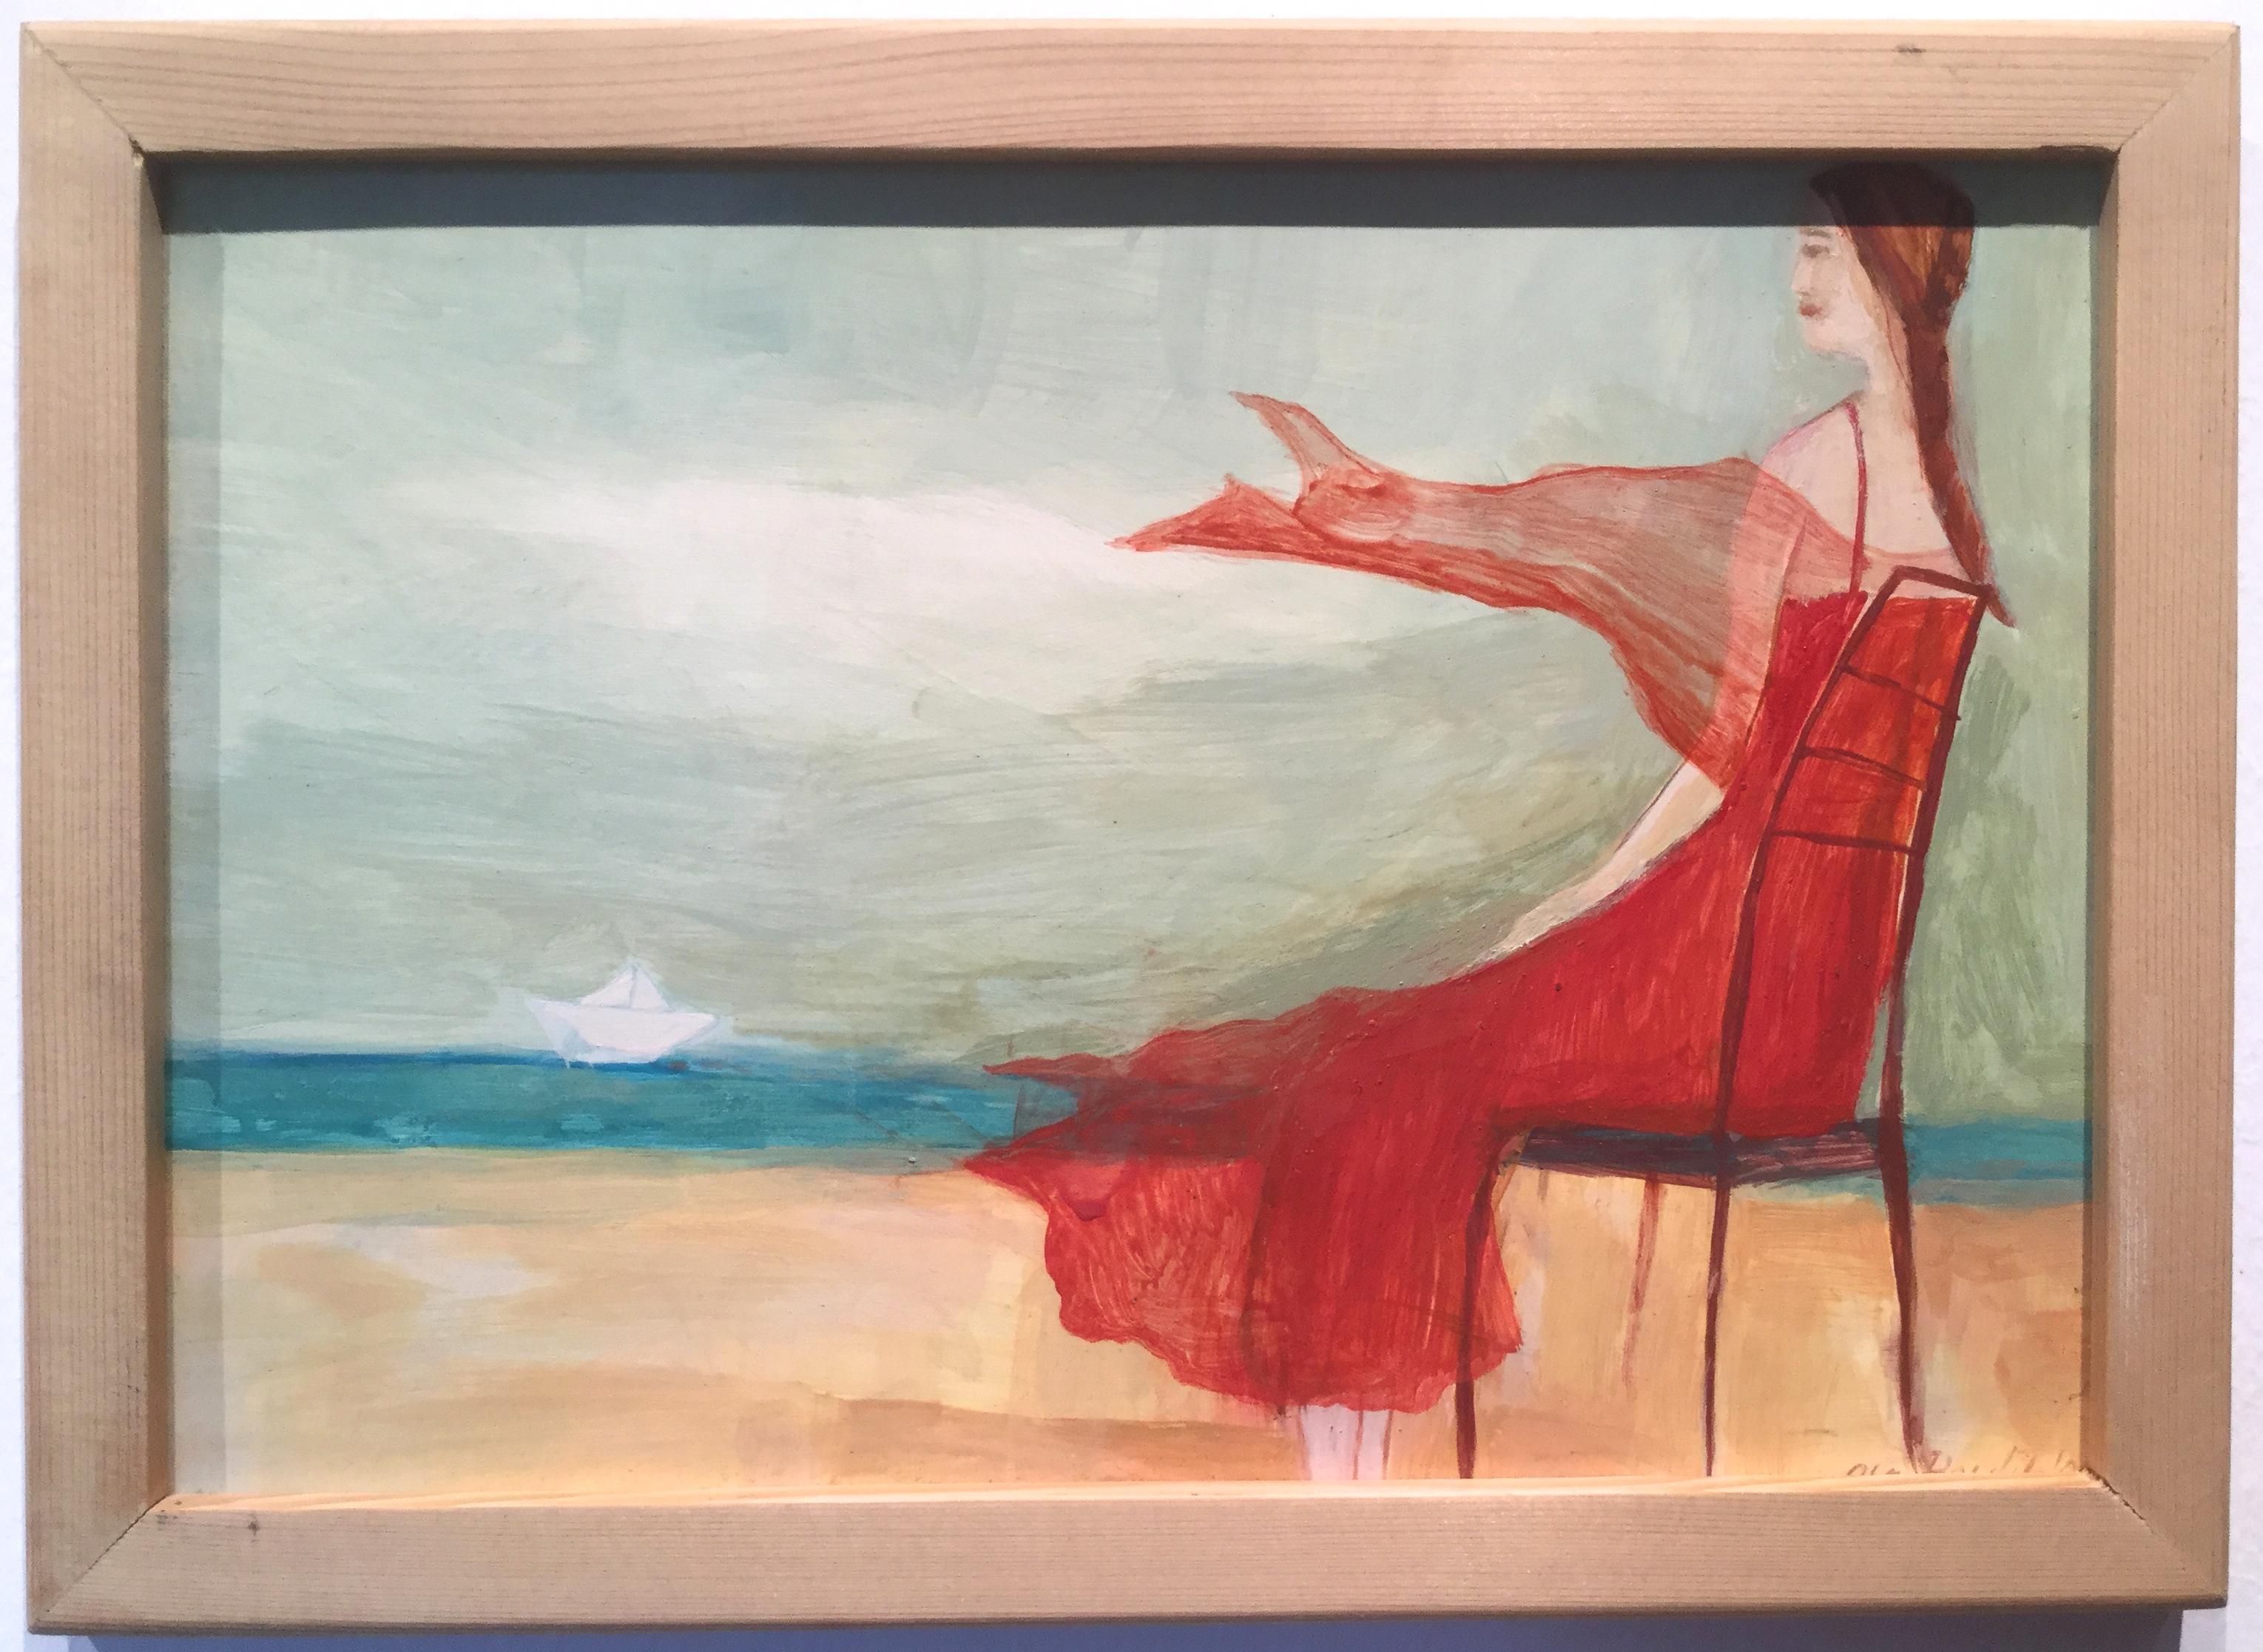 Girl In Red Dress Looks At The Sea - Graceful Illustrative Romantic Painting